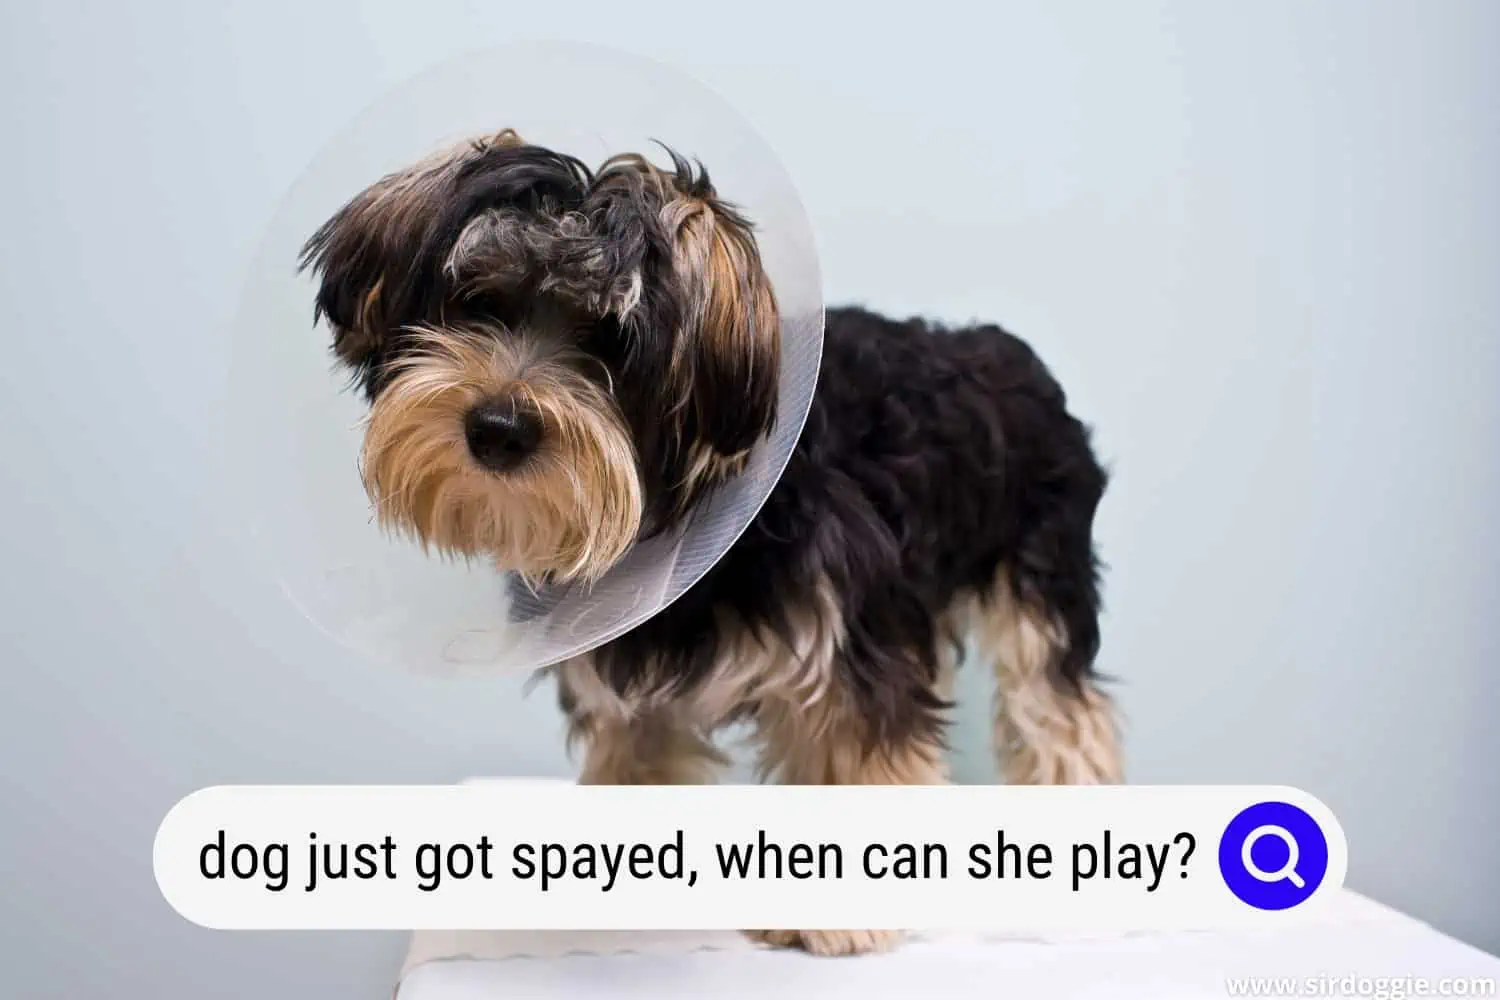 how long after spaying dog play